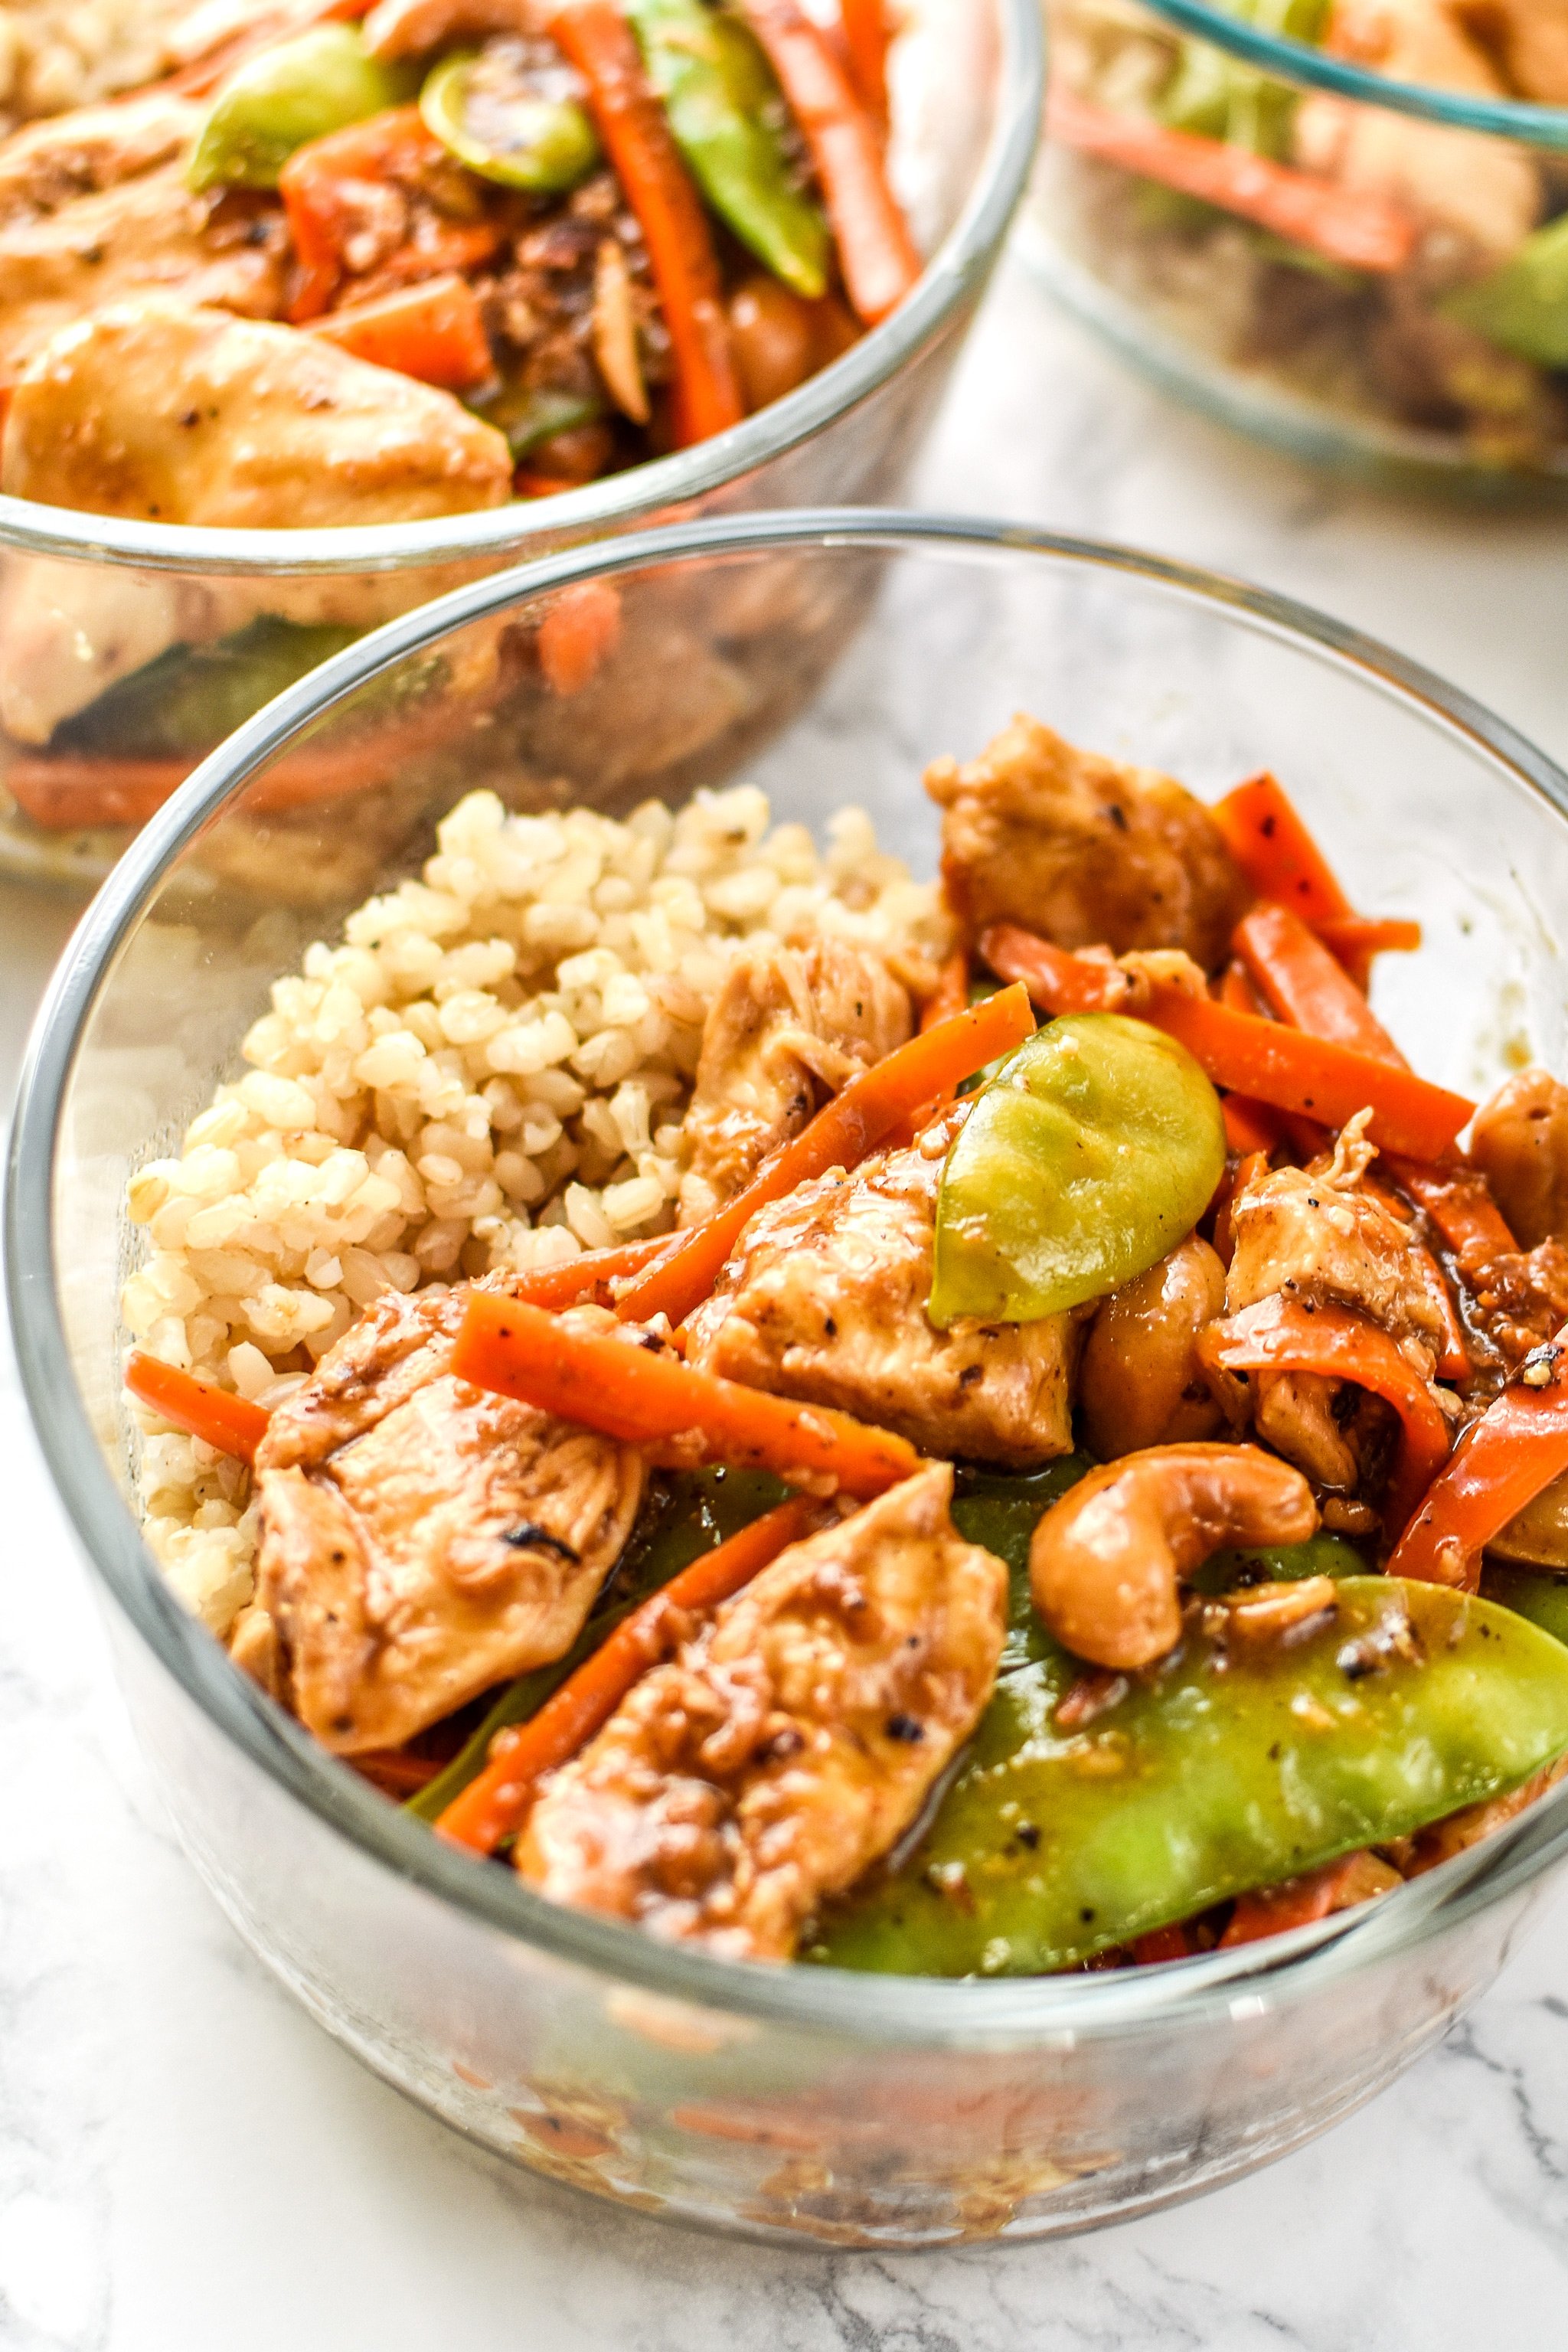 Cashew chicken meal prep with carrots and snow peas.